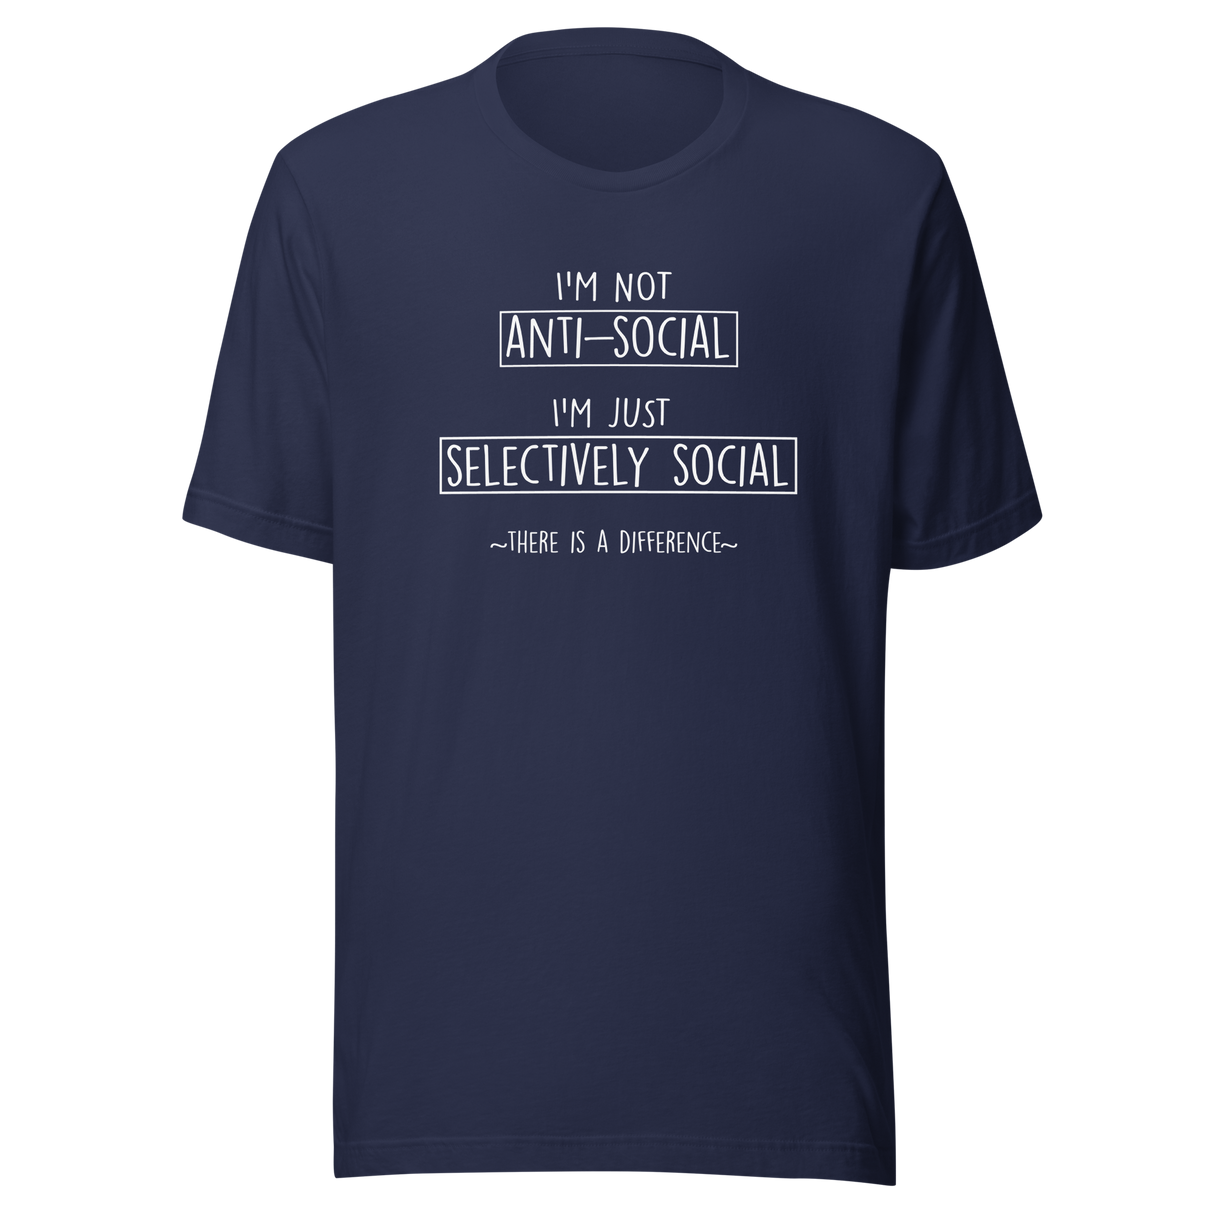 im-not-anti-social-i-am-selectively-social-there-is-a-difference-nerd-tee-anti-t-shirt-funny-tee-shy-t-shirt-humor-tee#color_navy